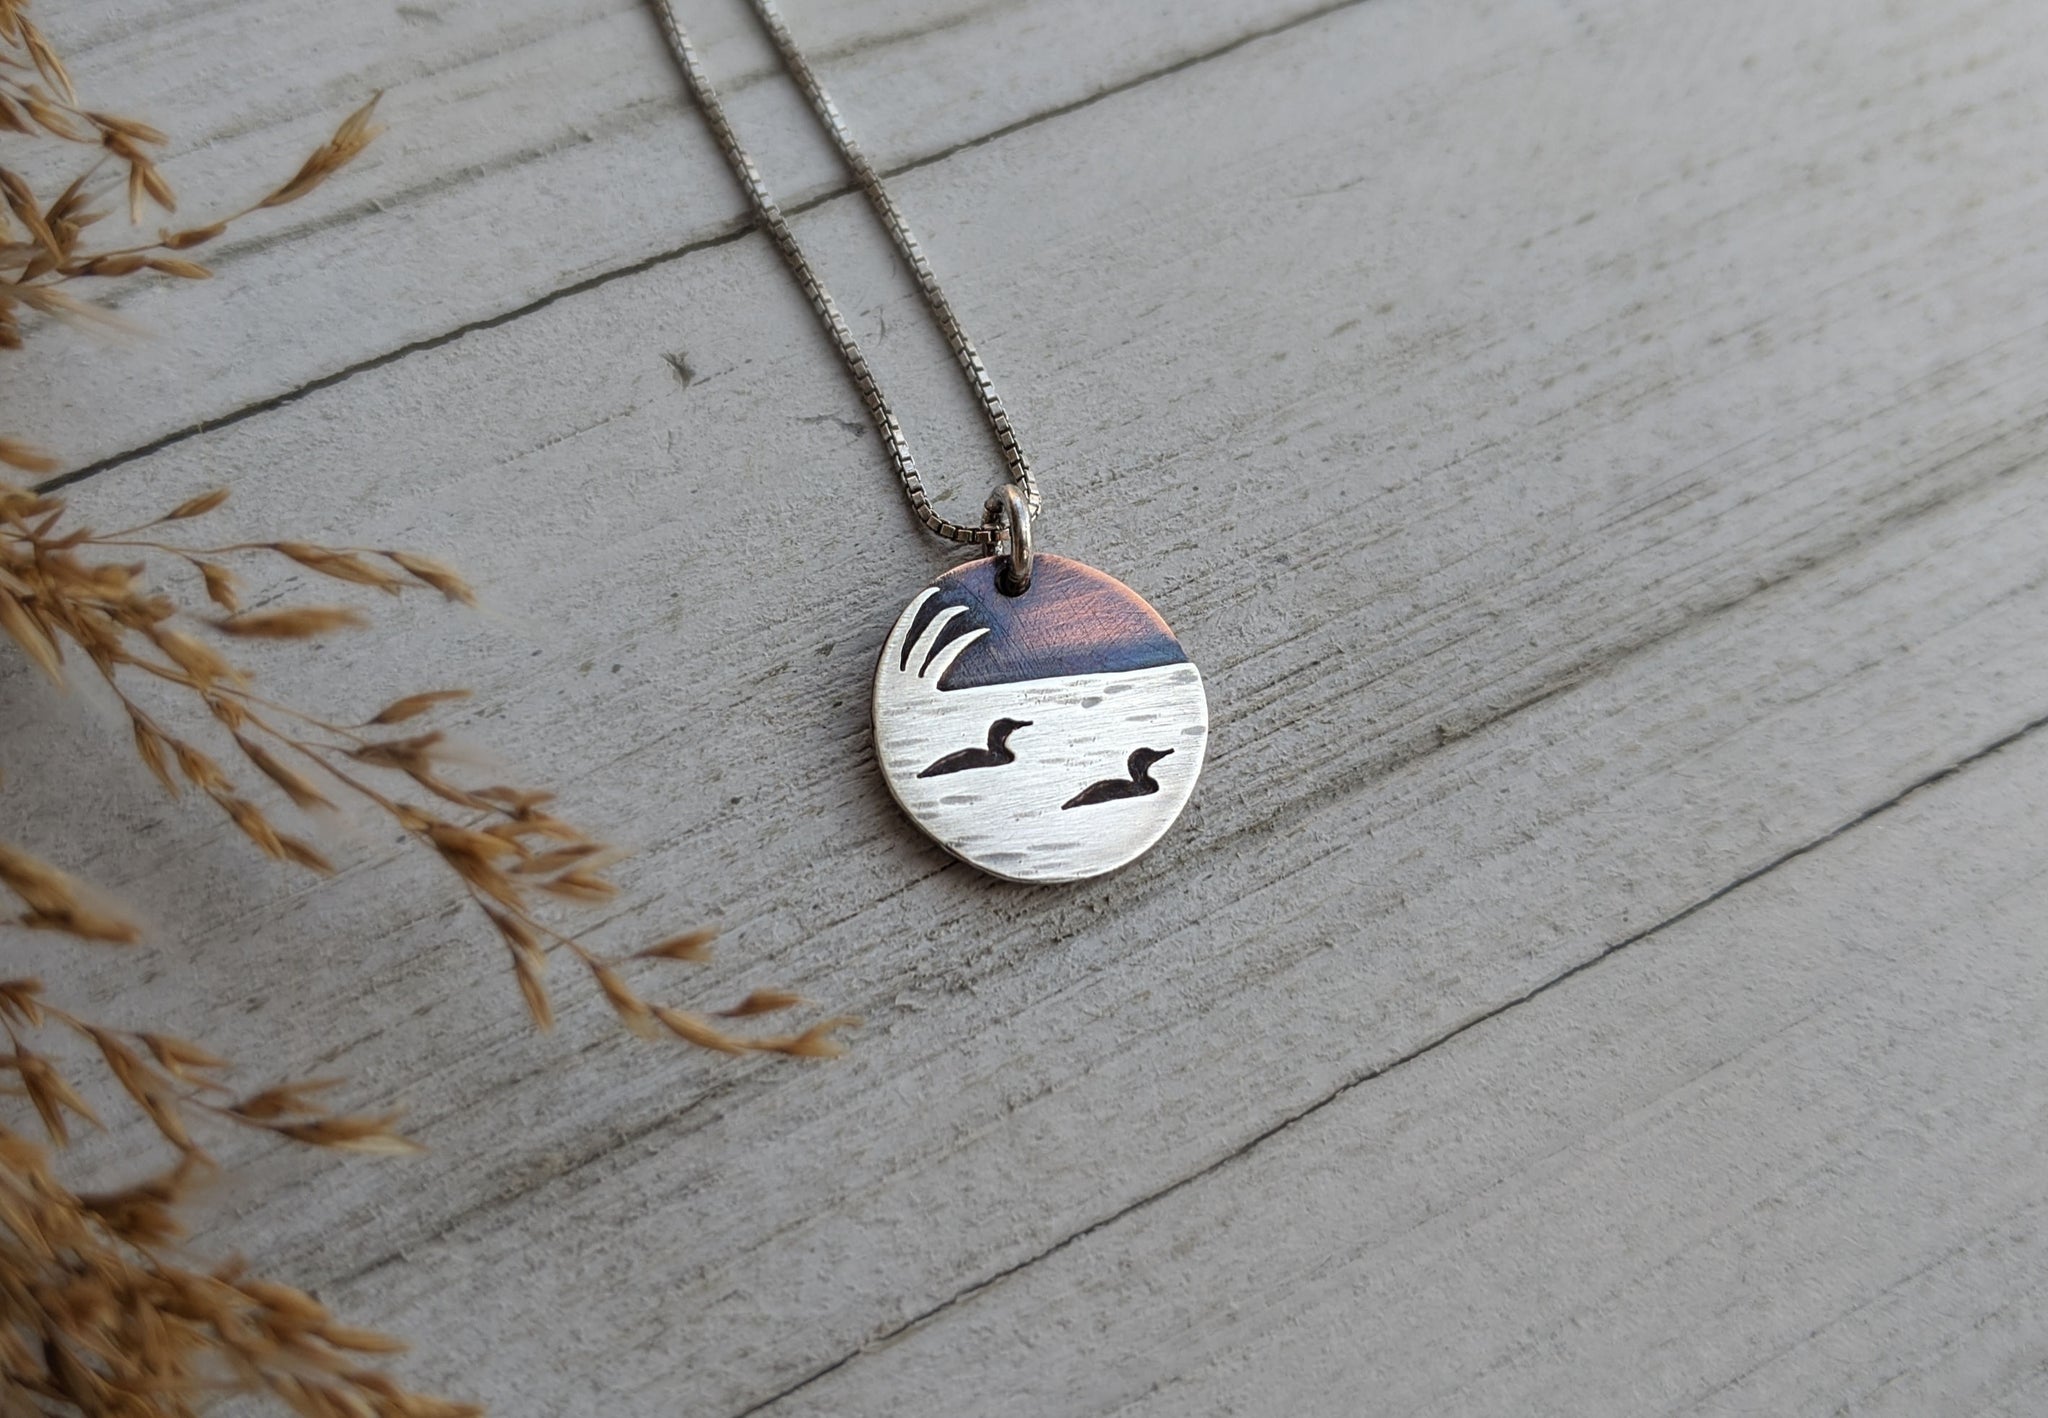 Loons on the lake - mixed metal loon wildlife pendant necklace